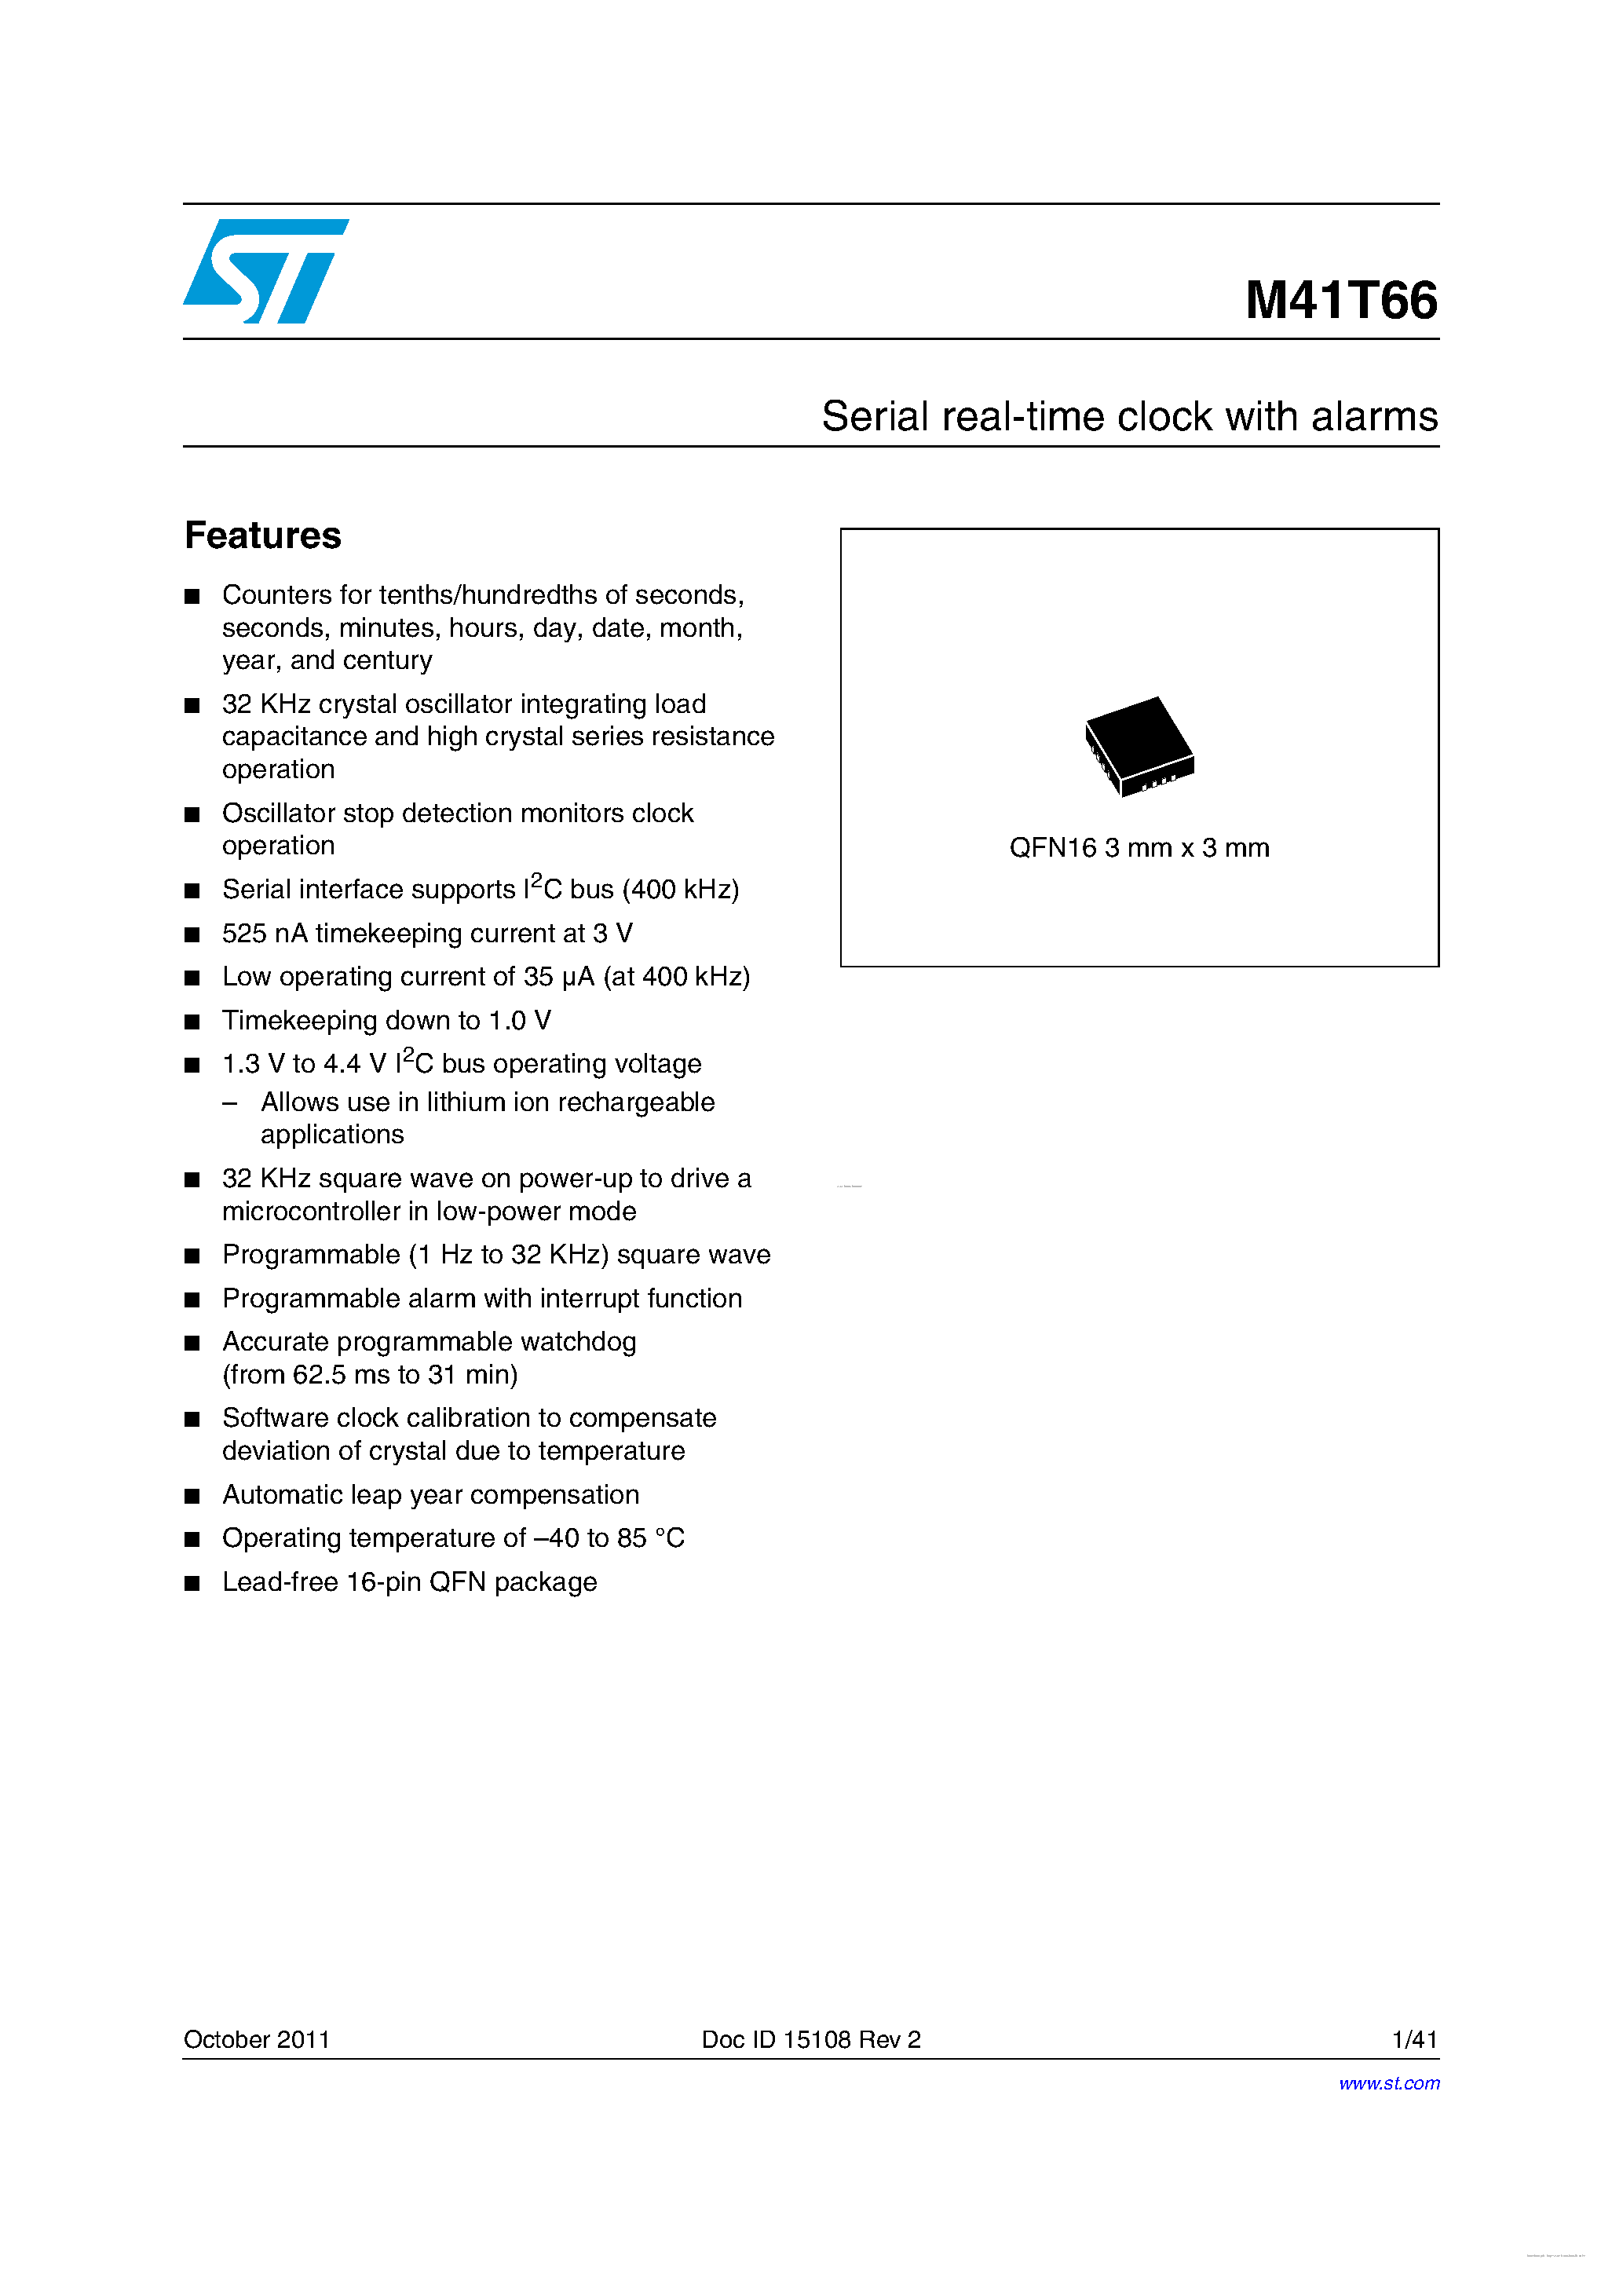 Datasheet M41T66 - Serial real-time clock page 1